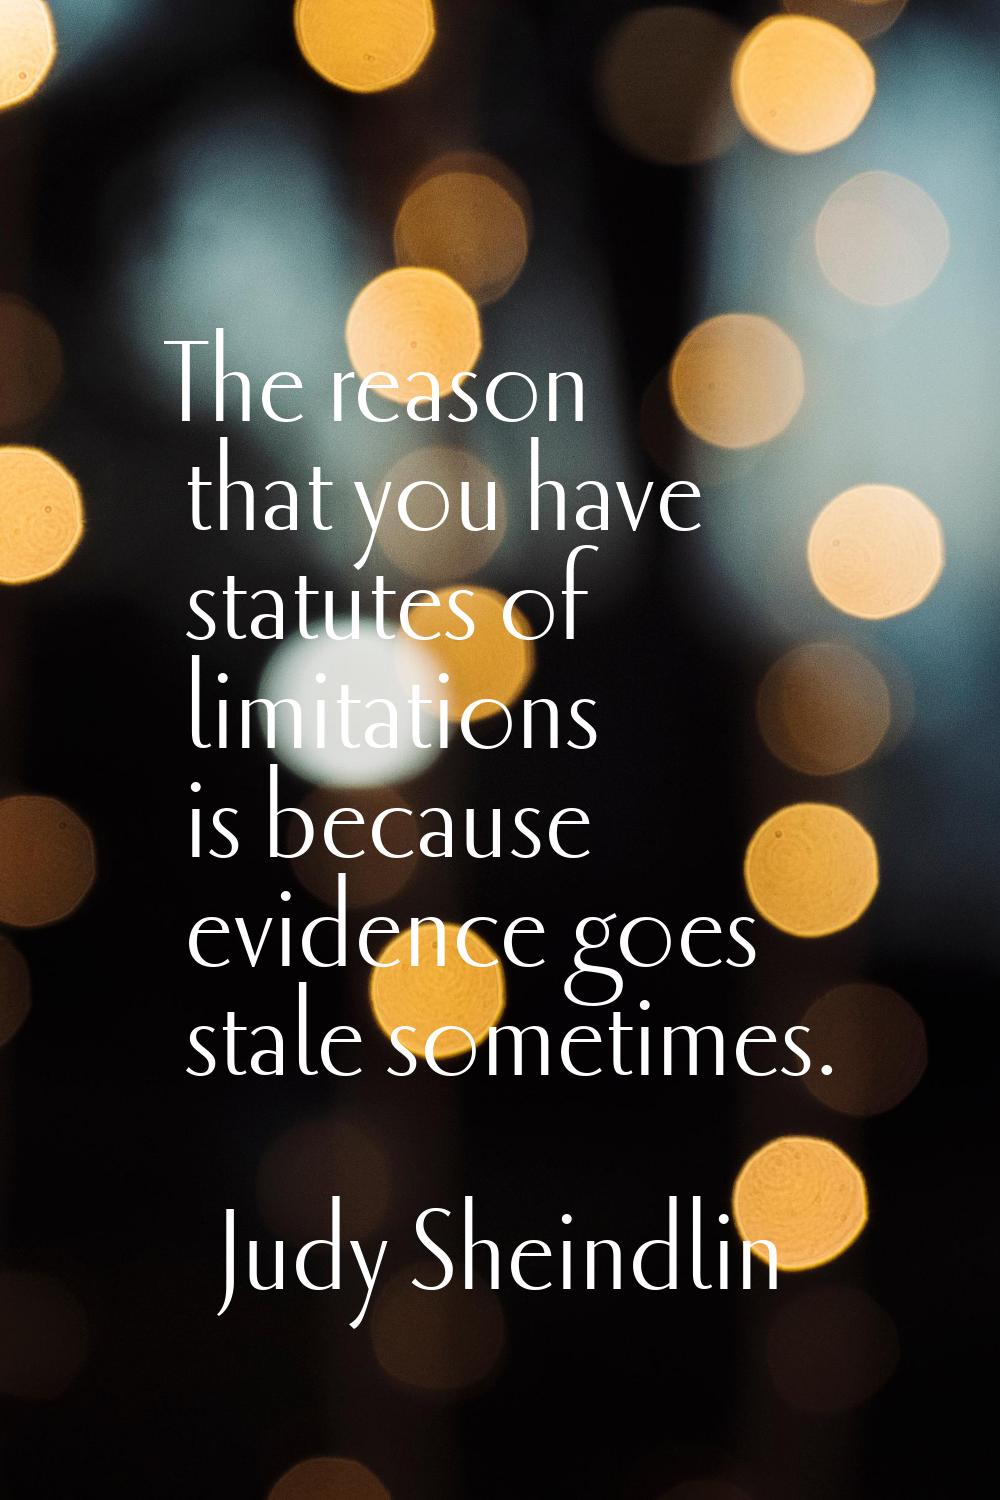 The reason that you have statutes of limitations is because evidence goes stale sometimes.